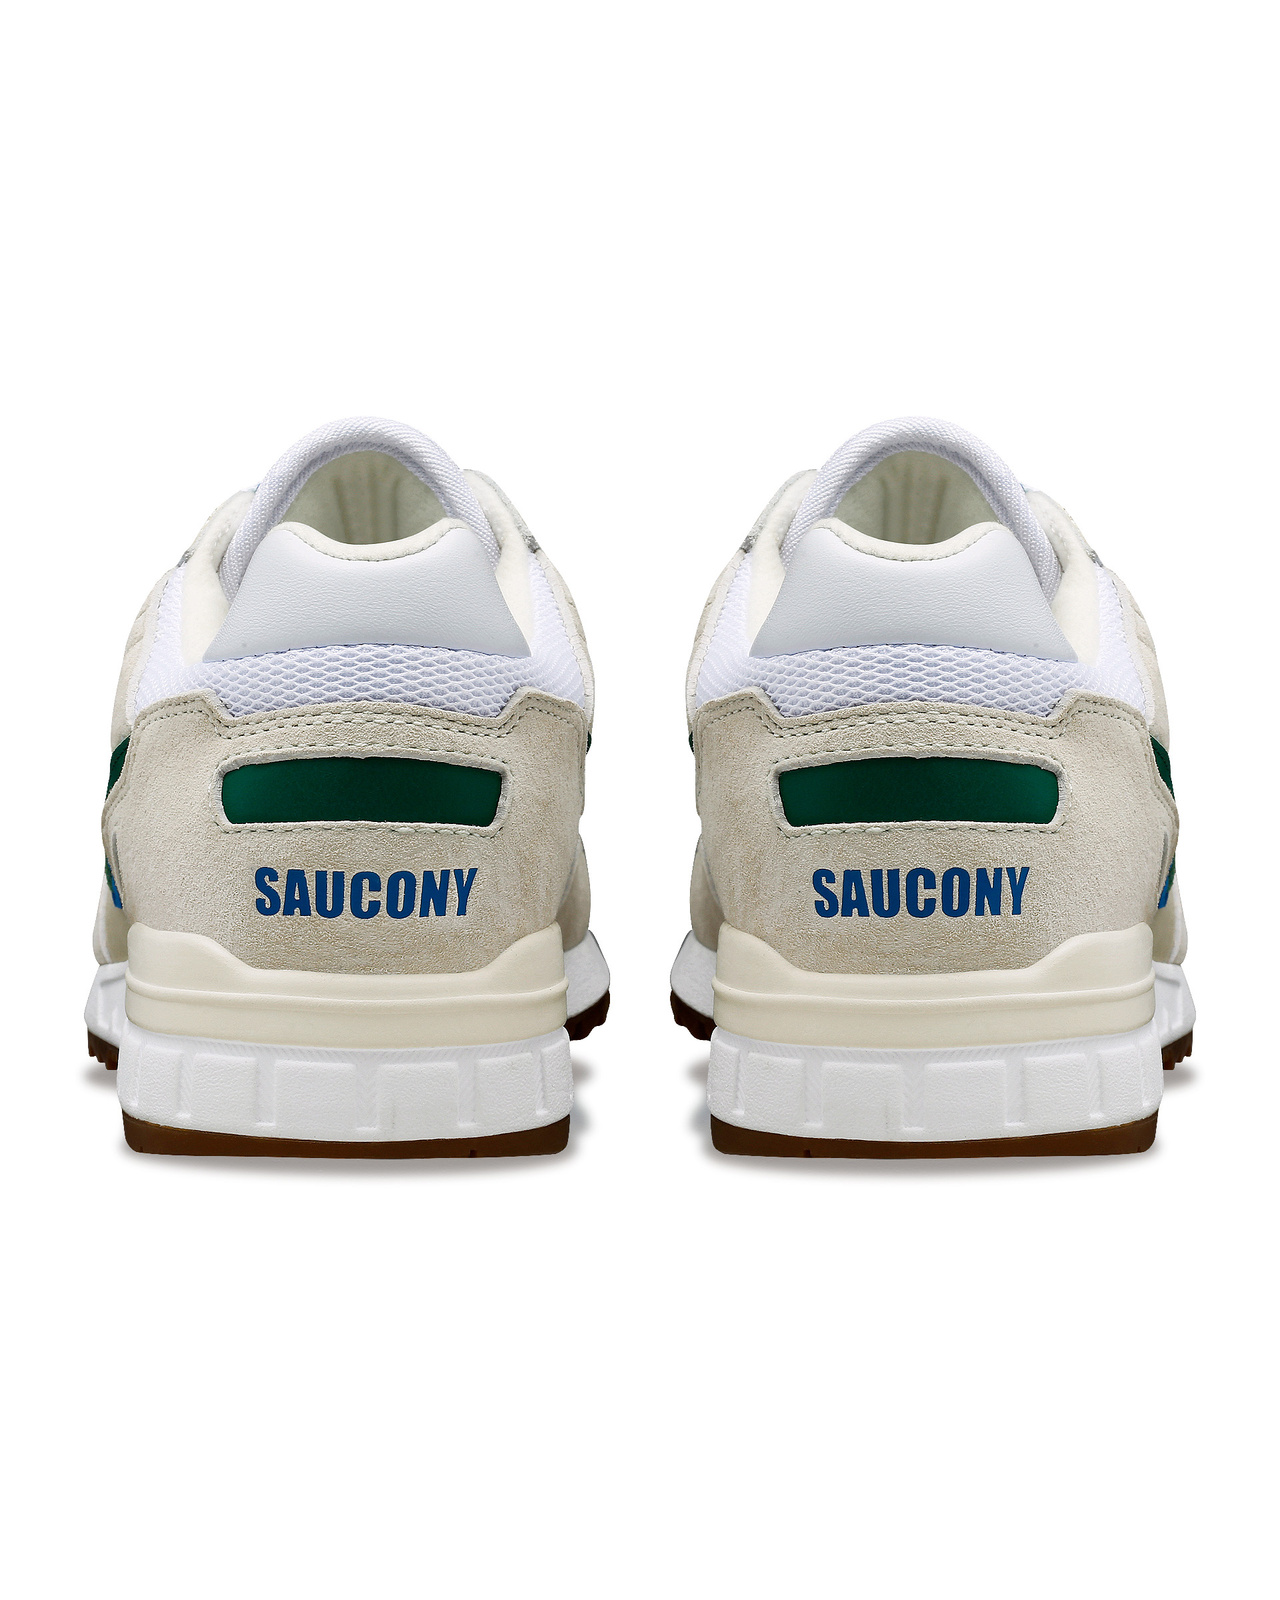 Sneaker Shadow 5000 New Normal - White/Green - 44